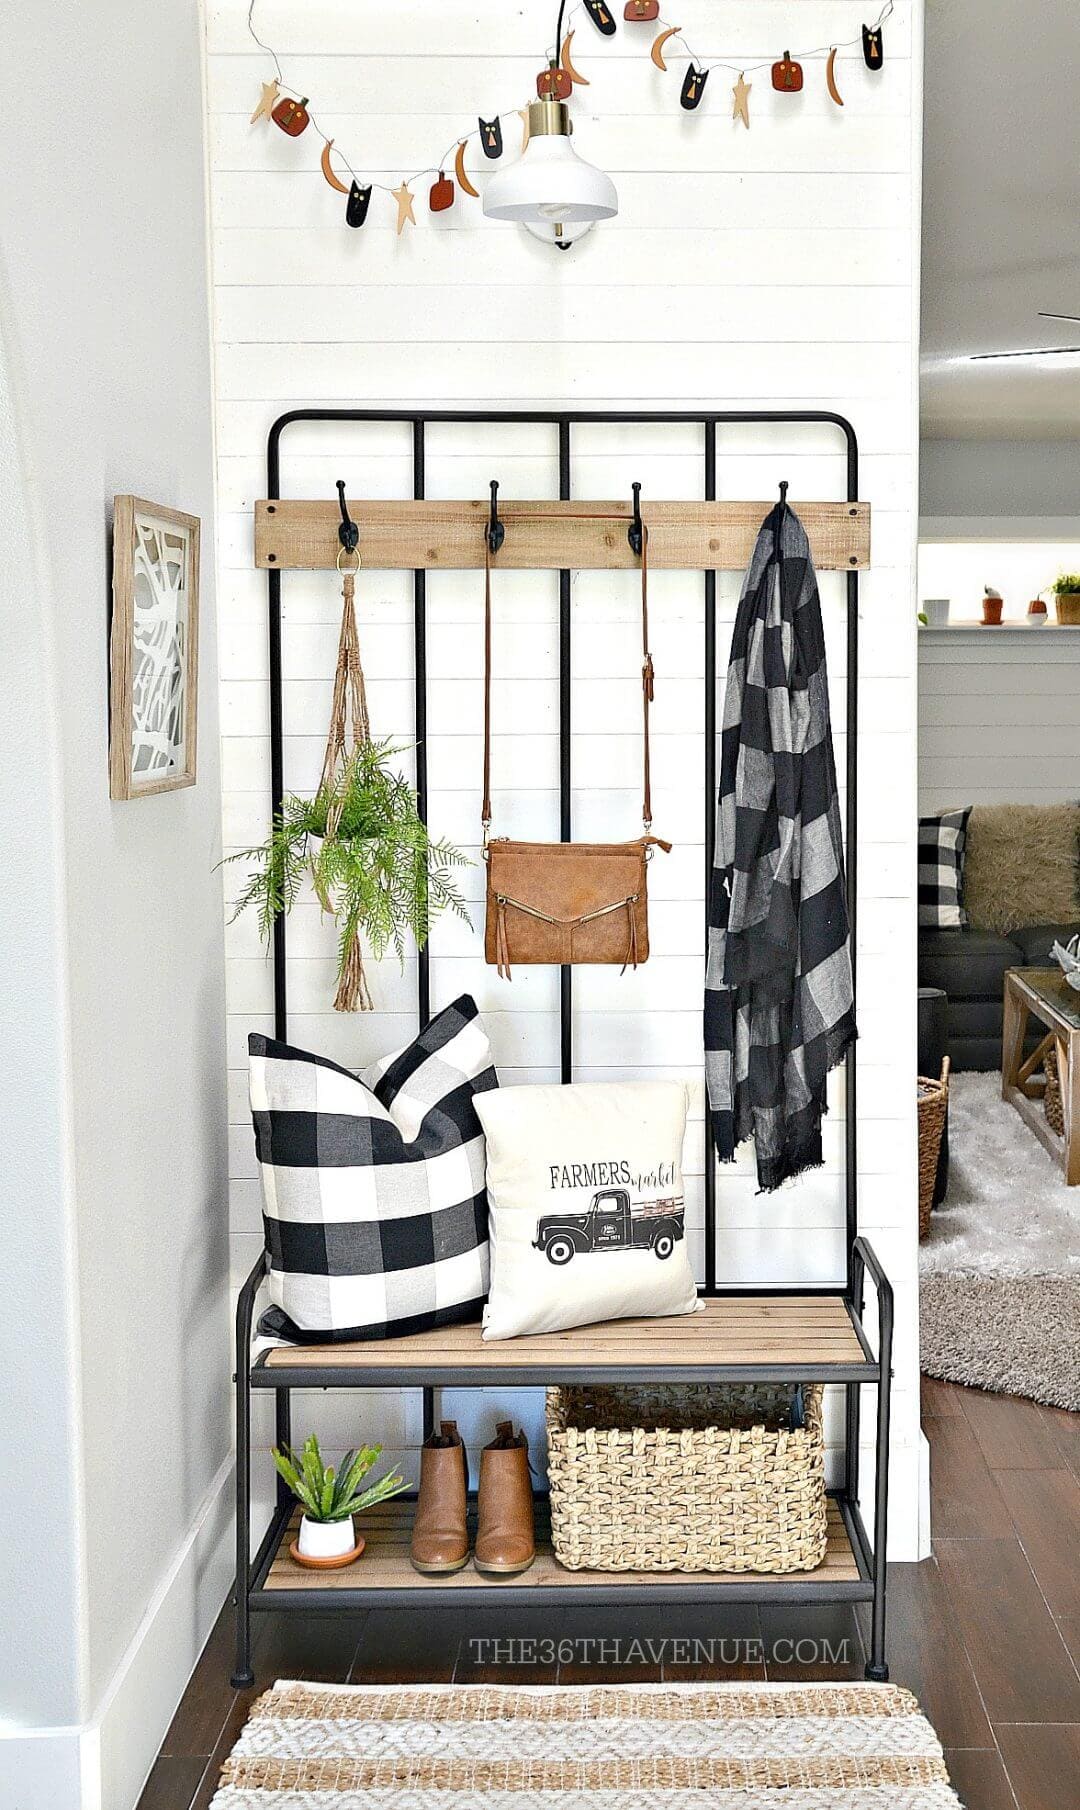 26 attractive decorating ideas for small entrances - 69